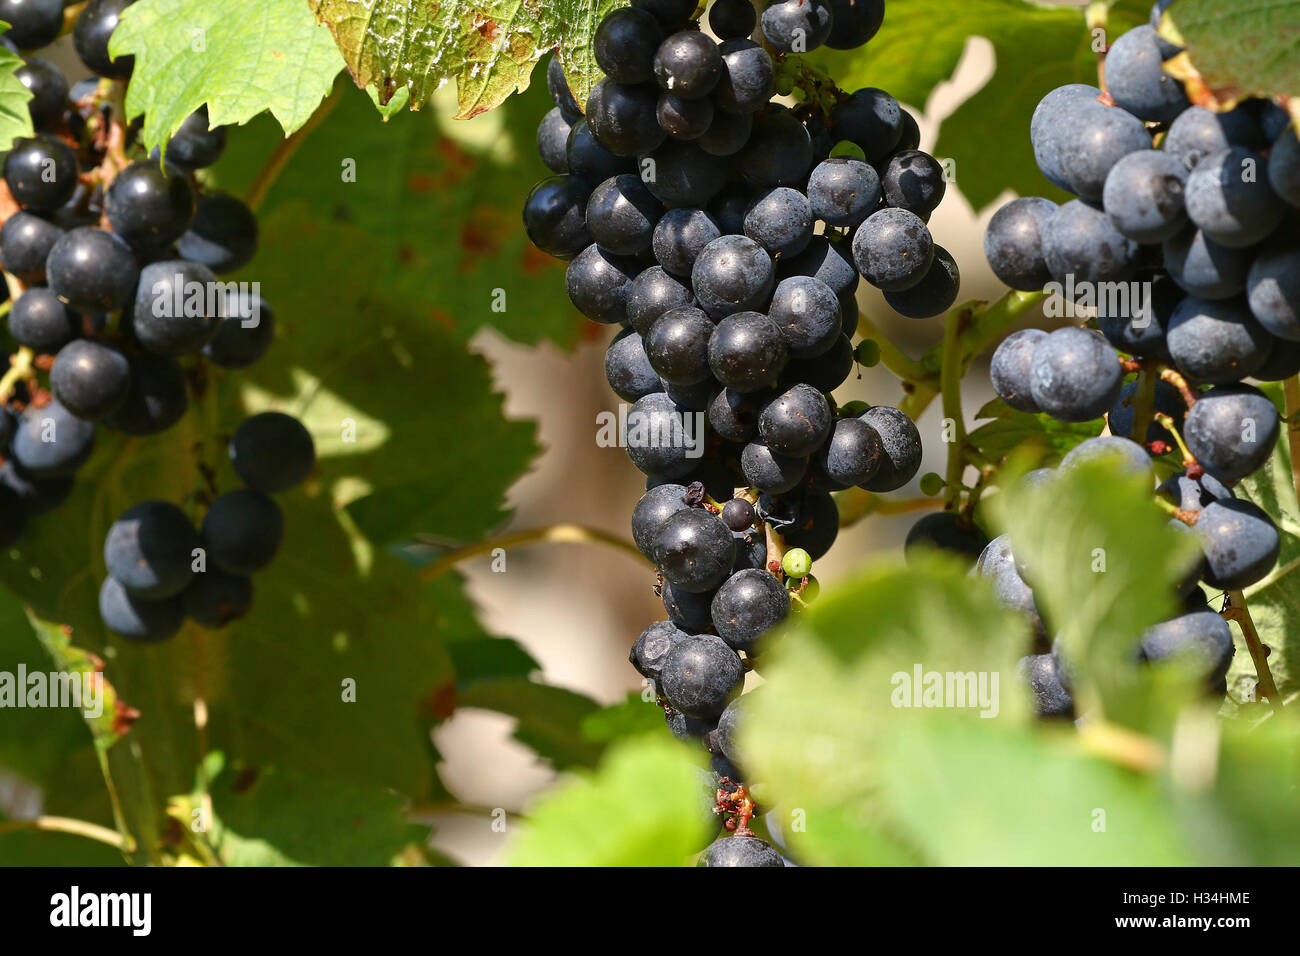 Grapes on vines in the fall ready to be harvested Stock Photo